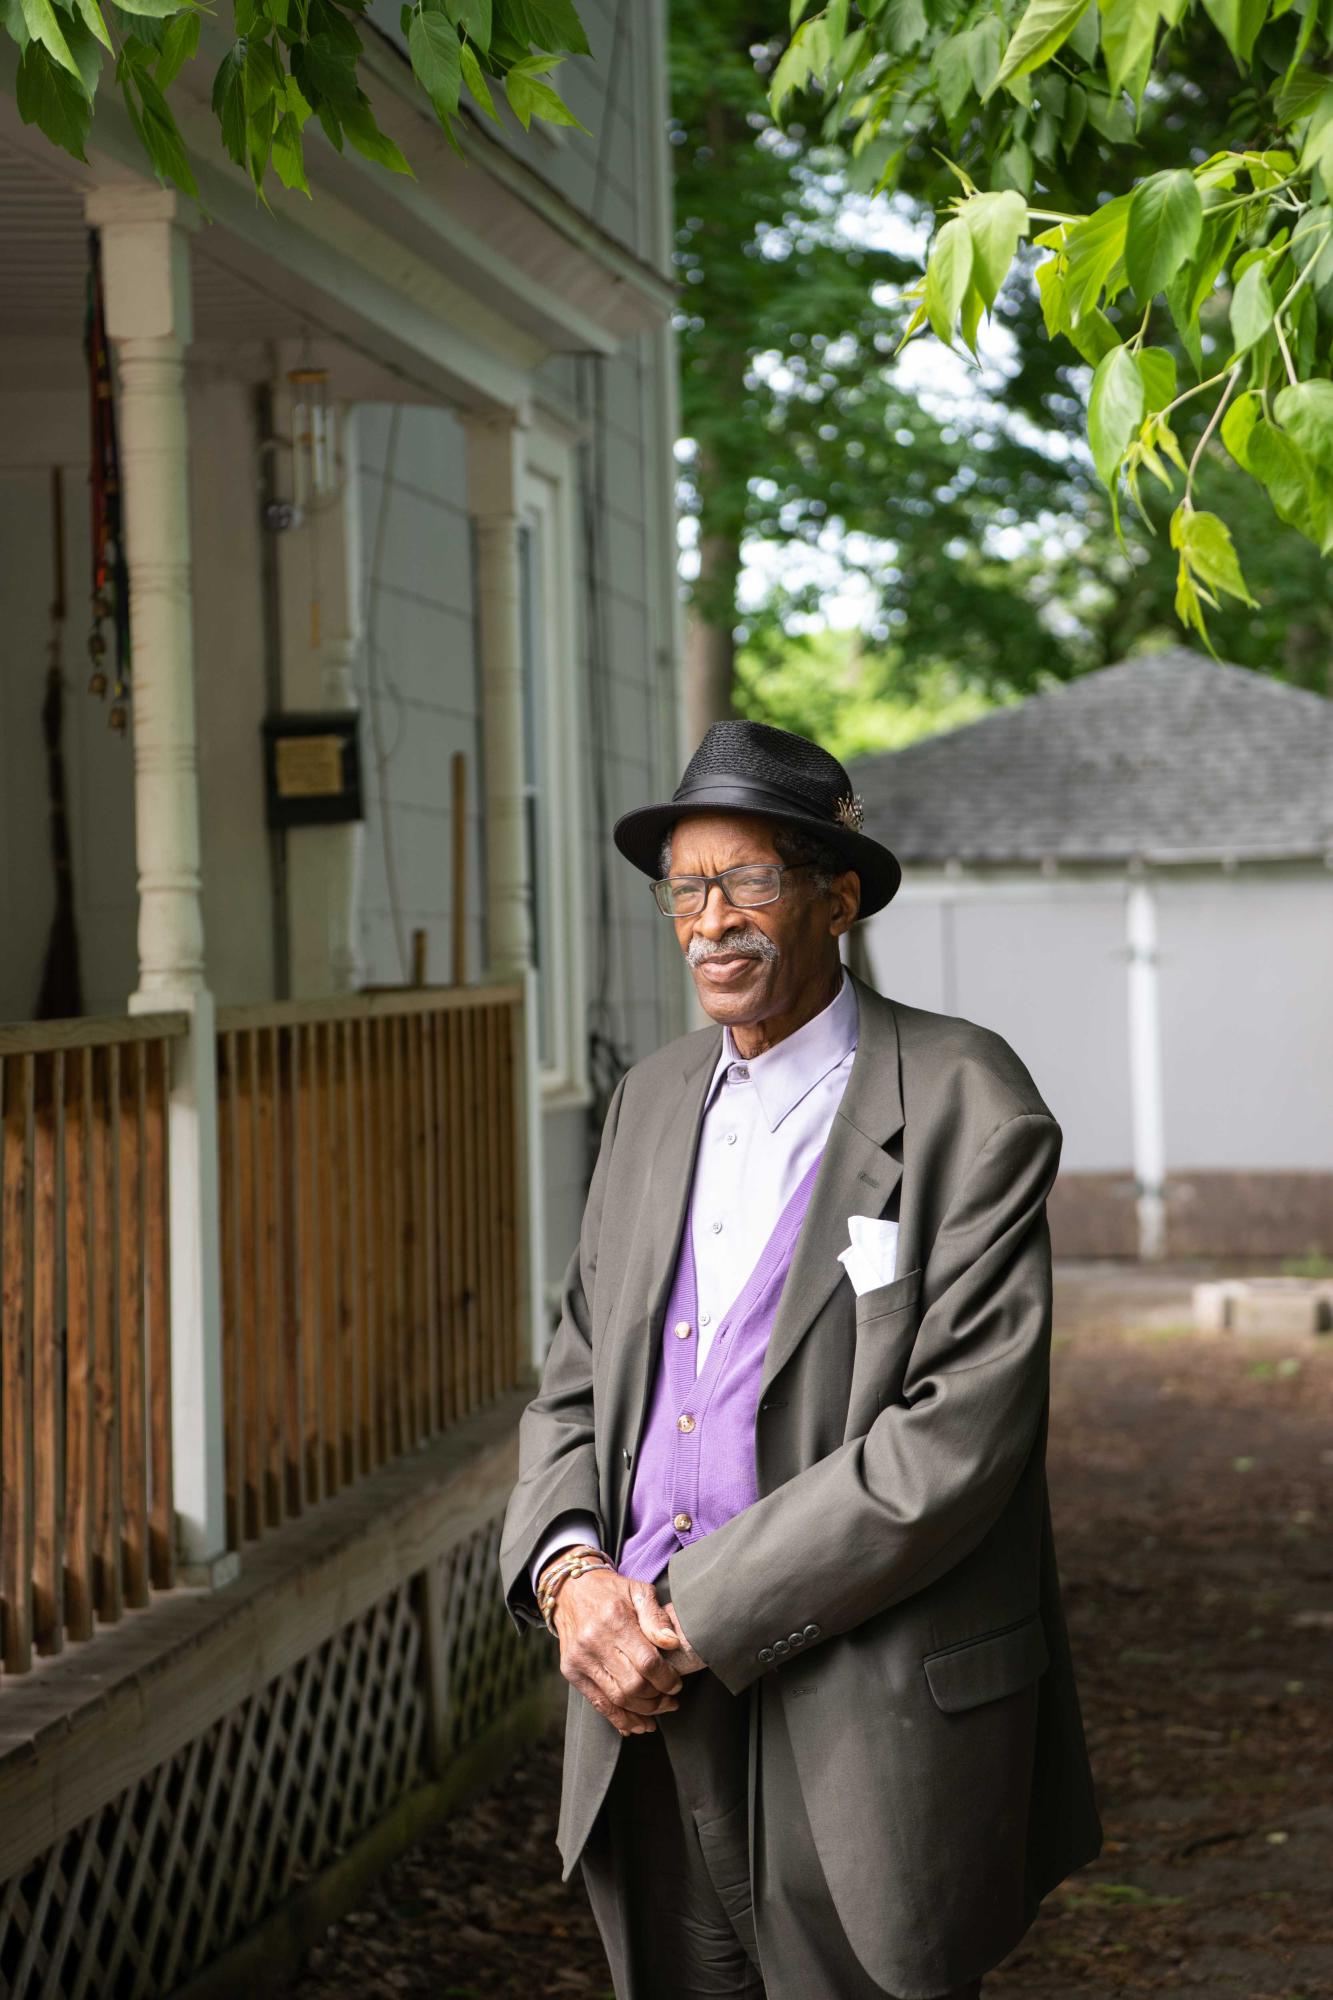 Portraits - Willie Clayton outside his rental property. Ben...